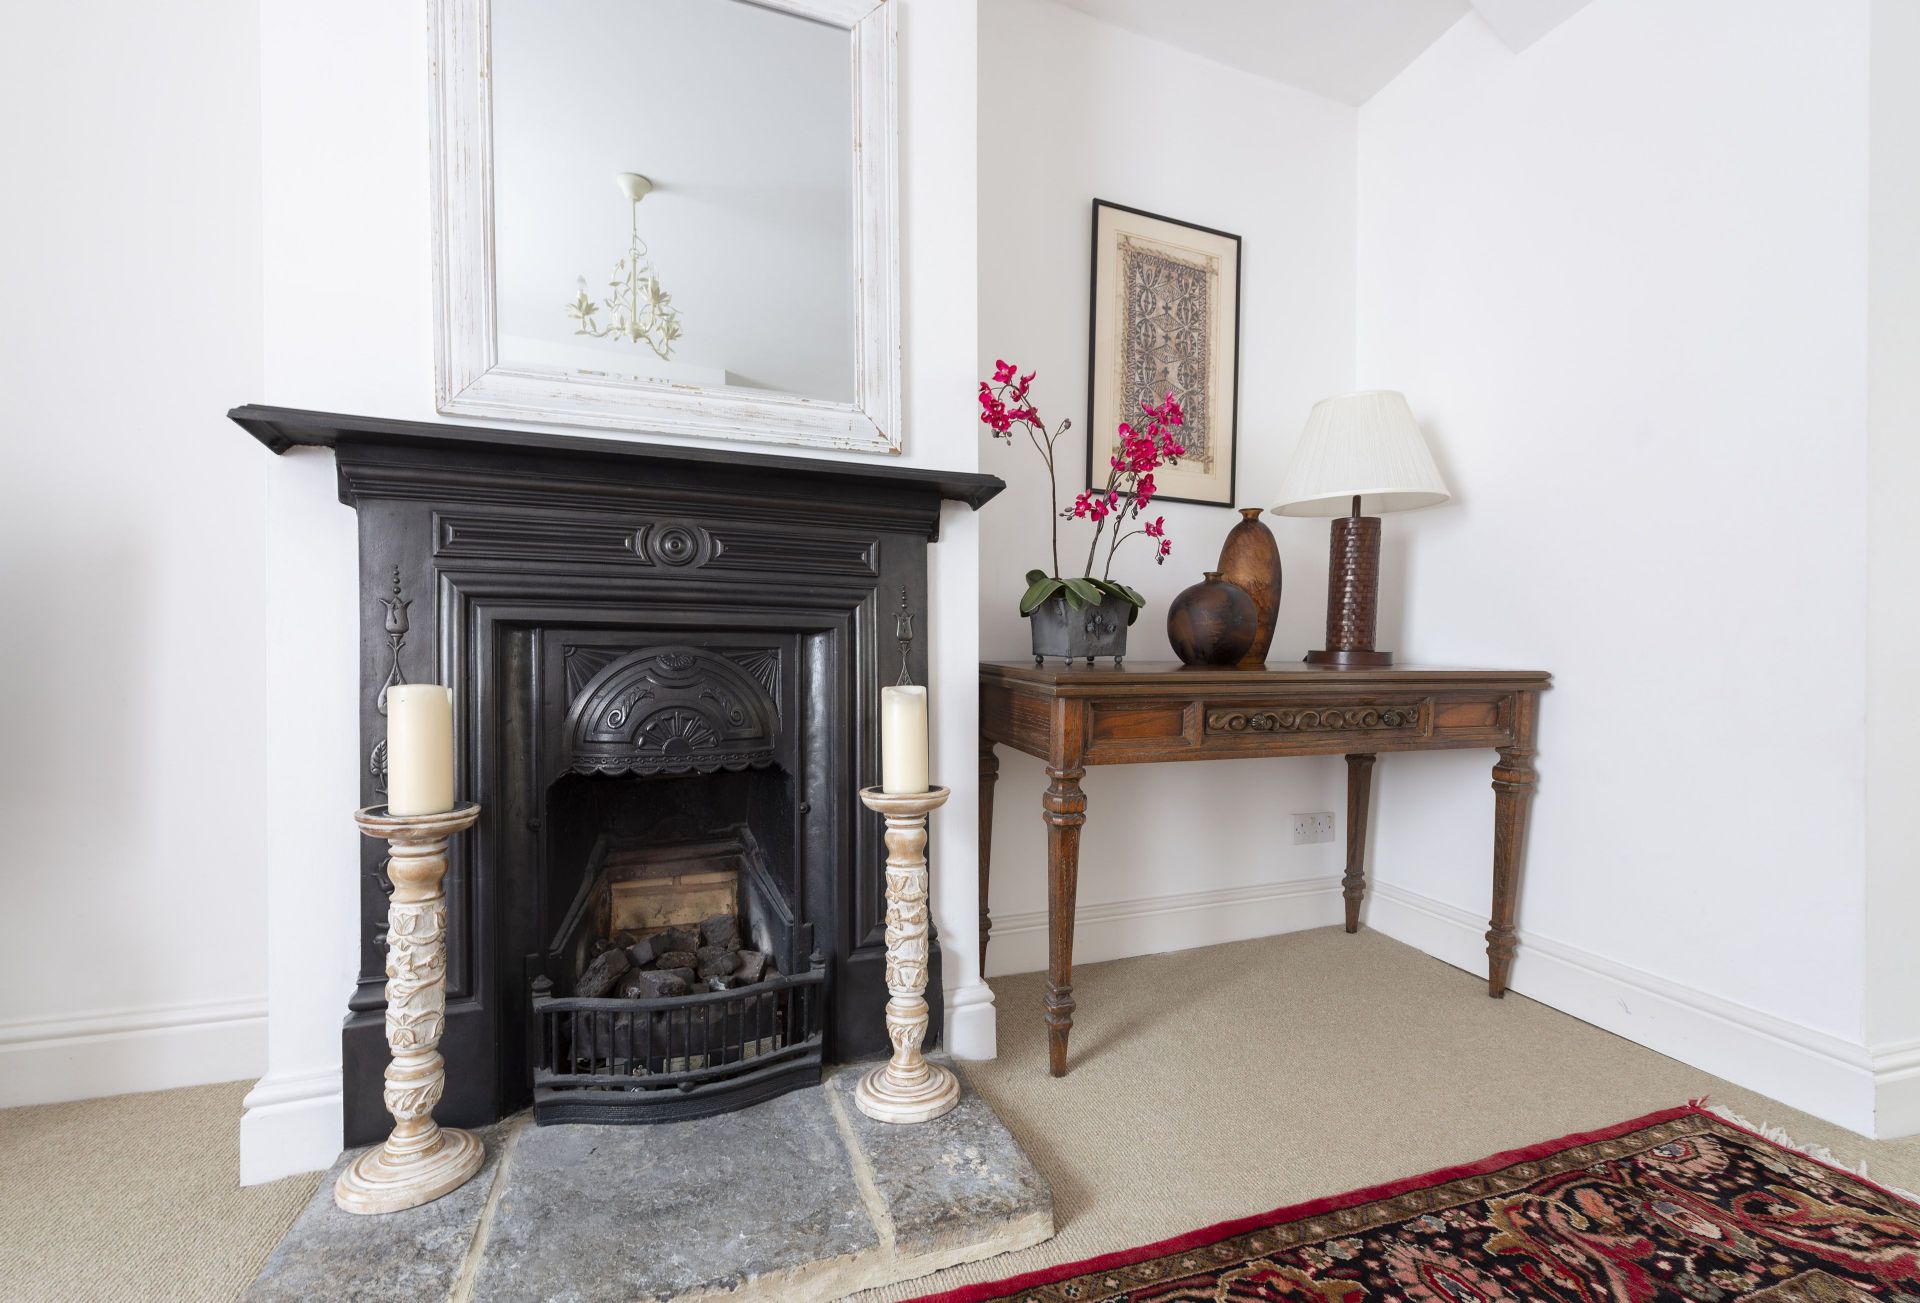 The Apartment at No.52 is located in Sherborne and surrounding villages